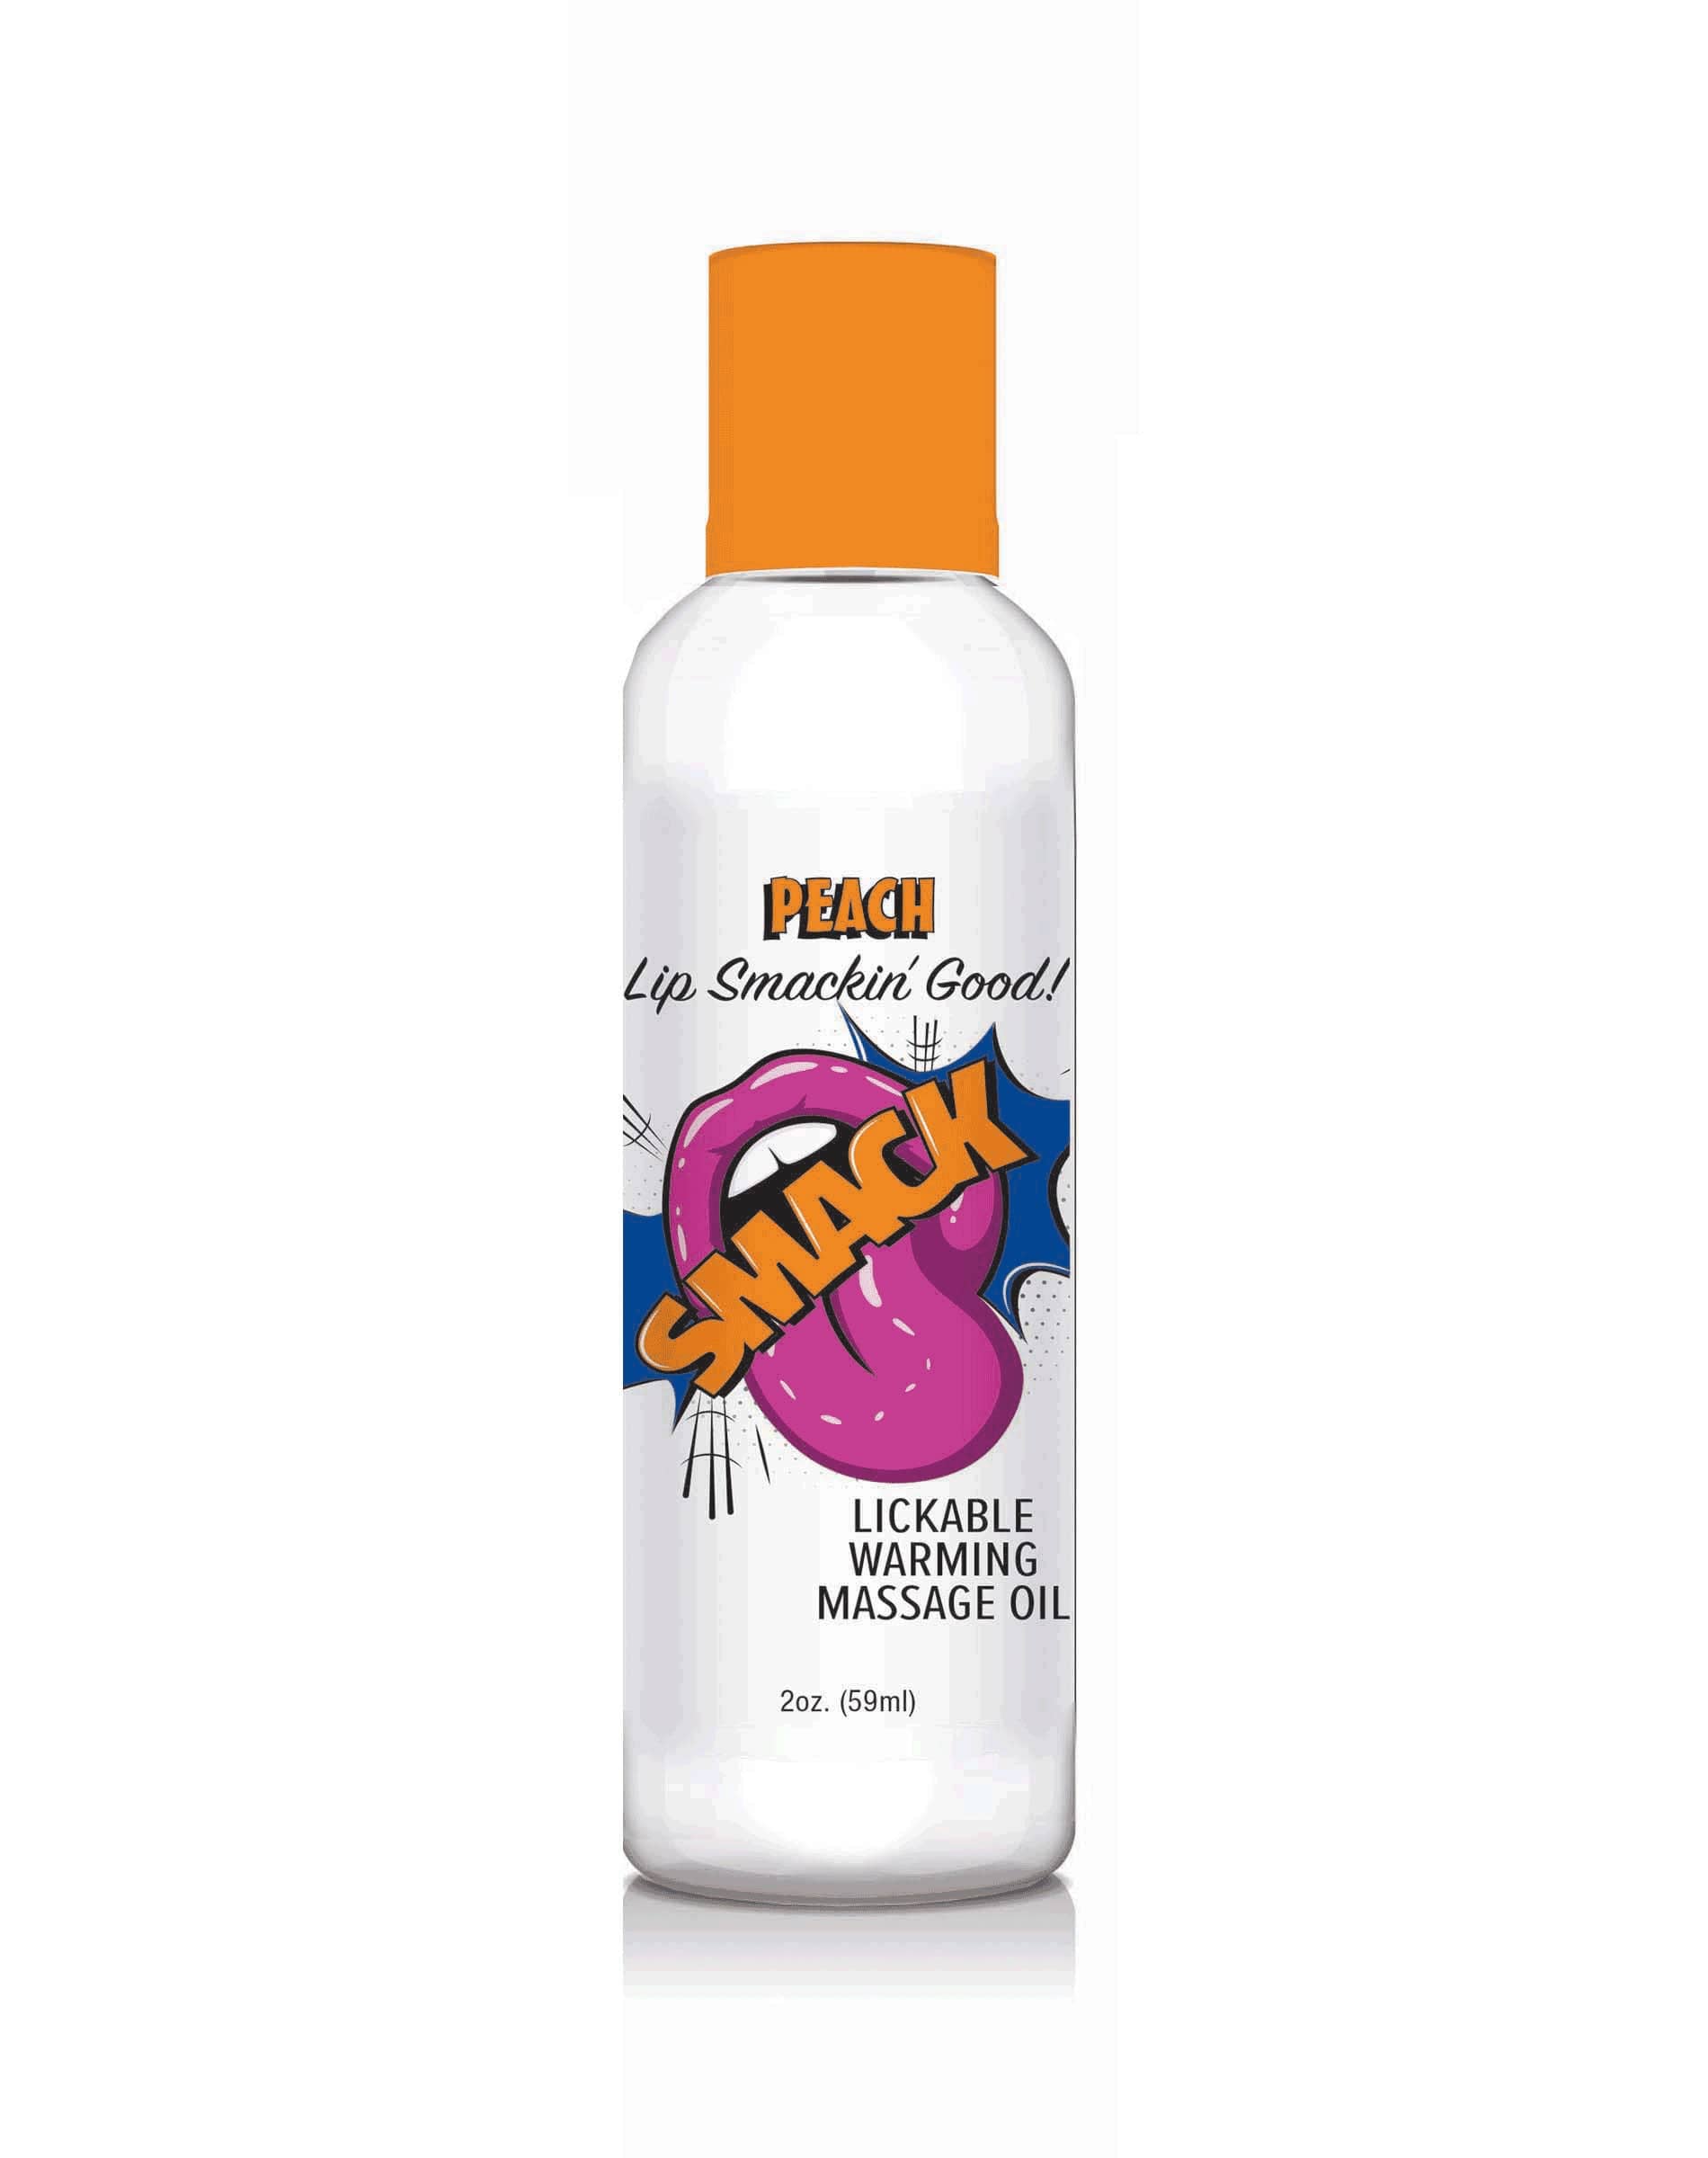 flavored lube, flavored lubricant